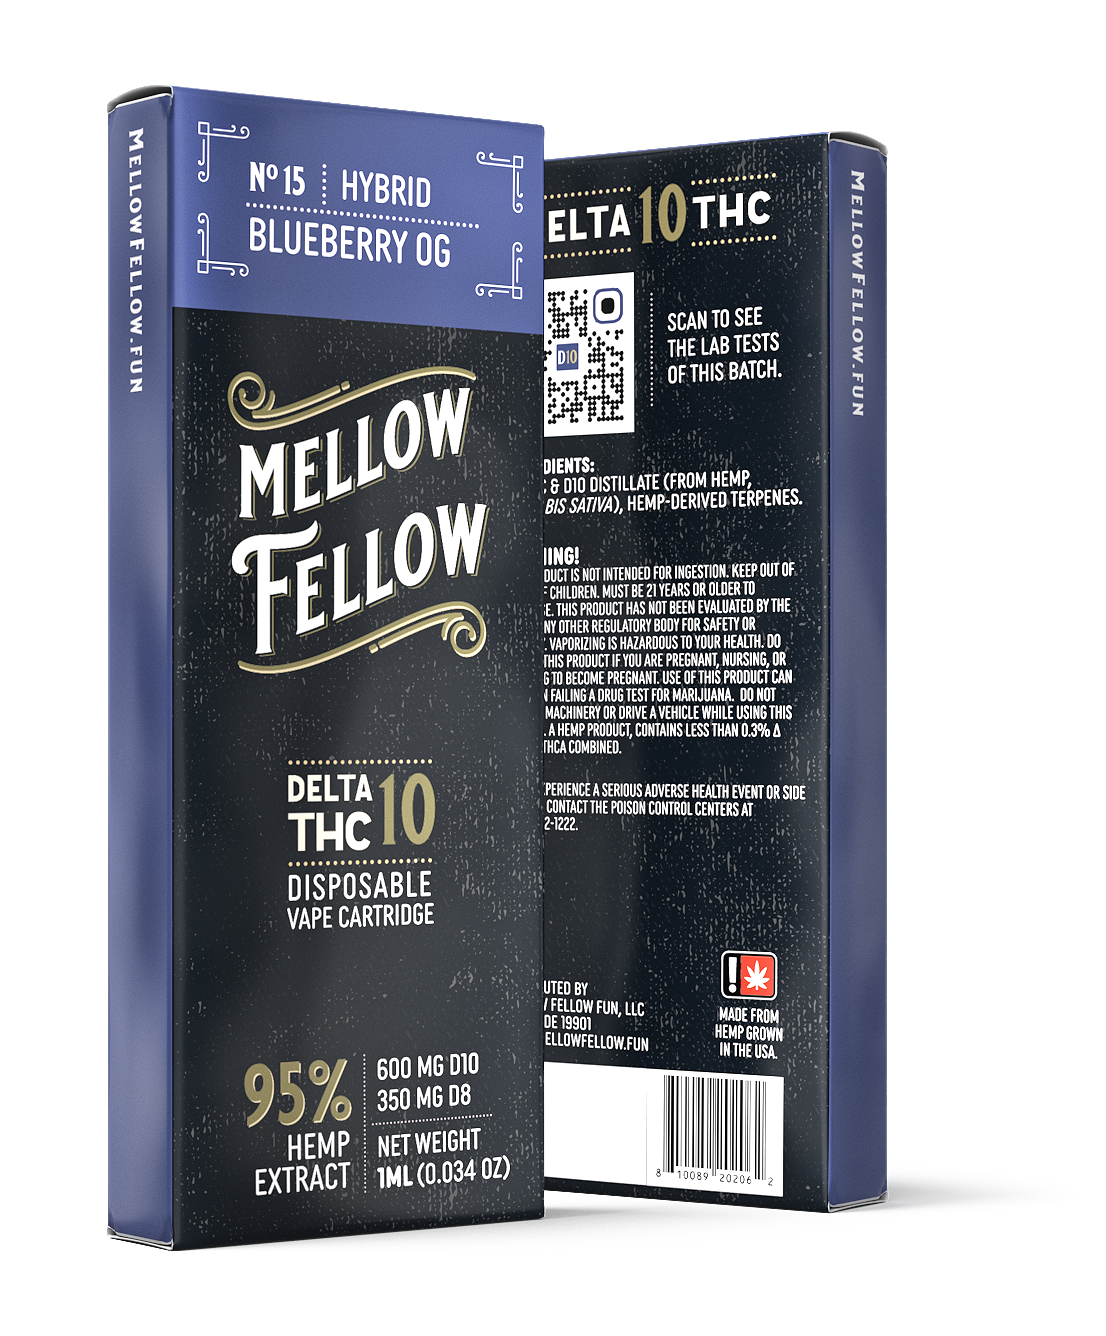 MELLOW FELLOW DELTA 10 DISPOSABLE DEVICE 950MG - DISPLAY OF 6CT